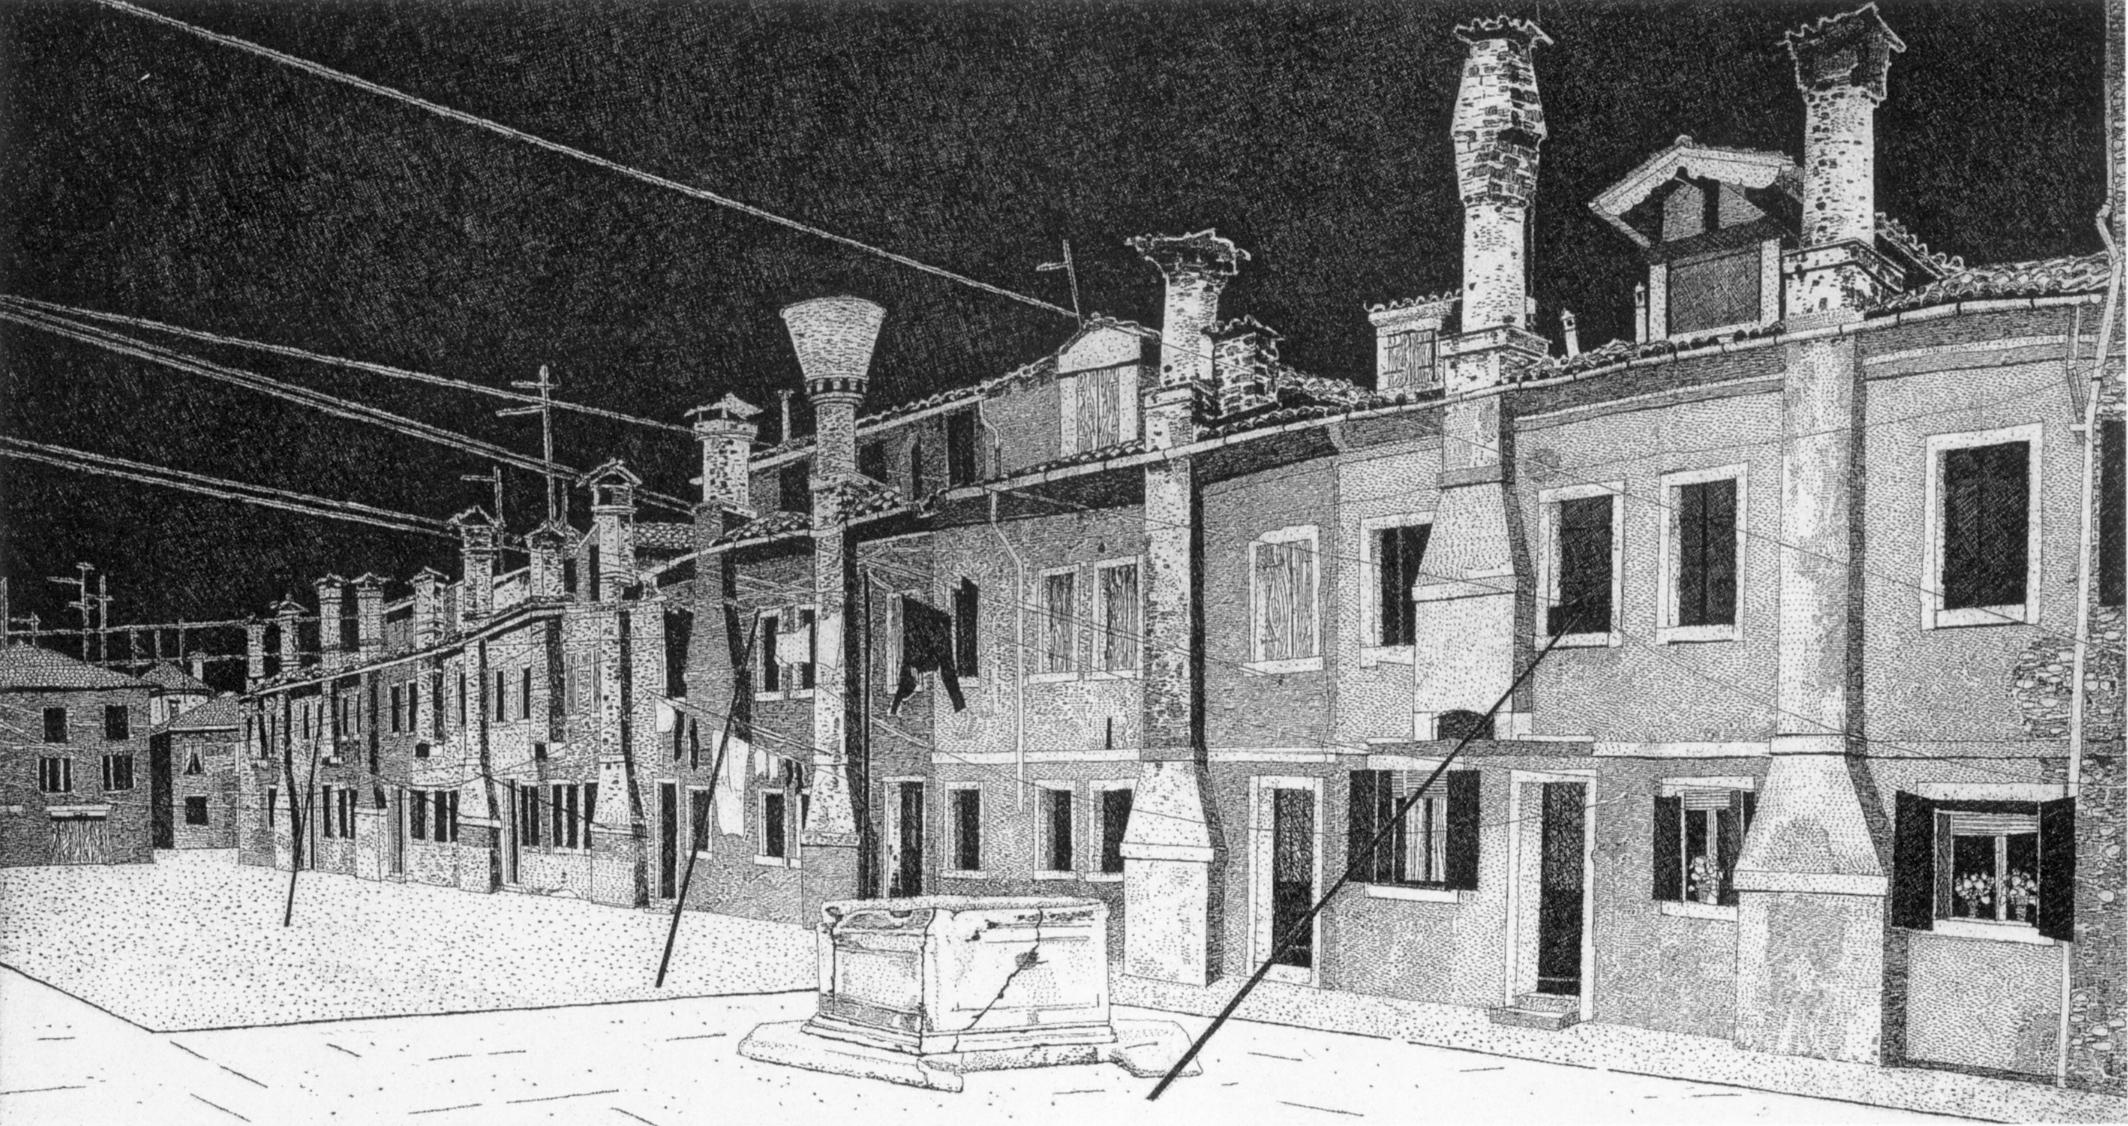 Nocturne Venice landscape, Giudecca, plate mm 343 x 641
Original etching, signed and numbered, limited edition of 90.

Maison Valentino set up the Giudecca for its latest haute couture show, on the occasion of the Biennal di Venezia dl 2022.


The